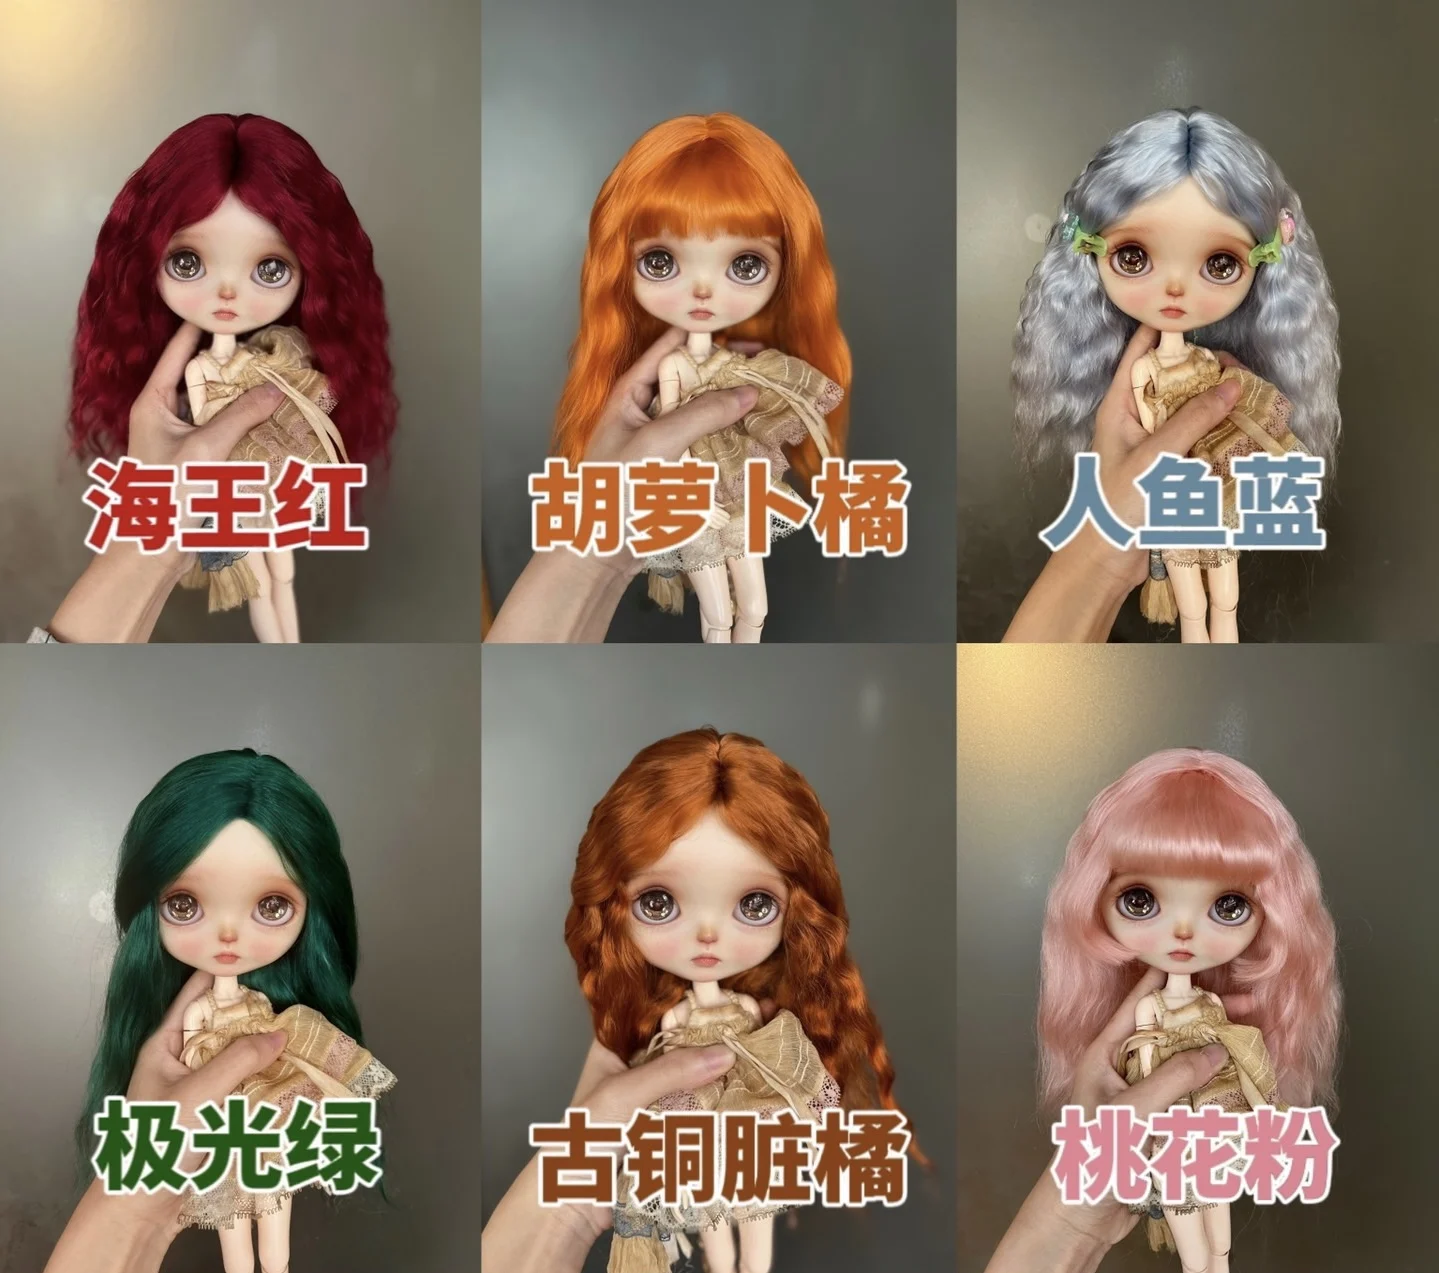 

Doll Wigs Blythe Qbaby natural Simple basic Colorful Mohair Microvolumes curls 9-10 inch head circumstance Free Shipping